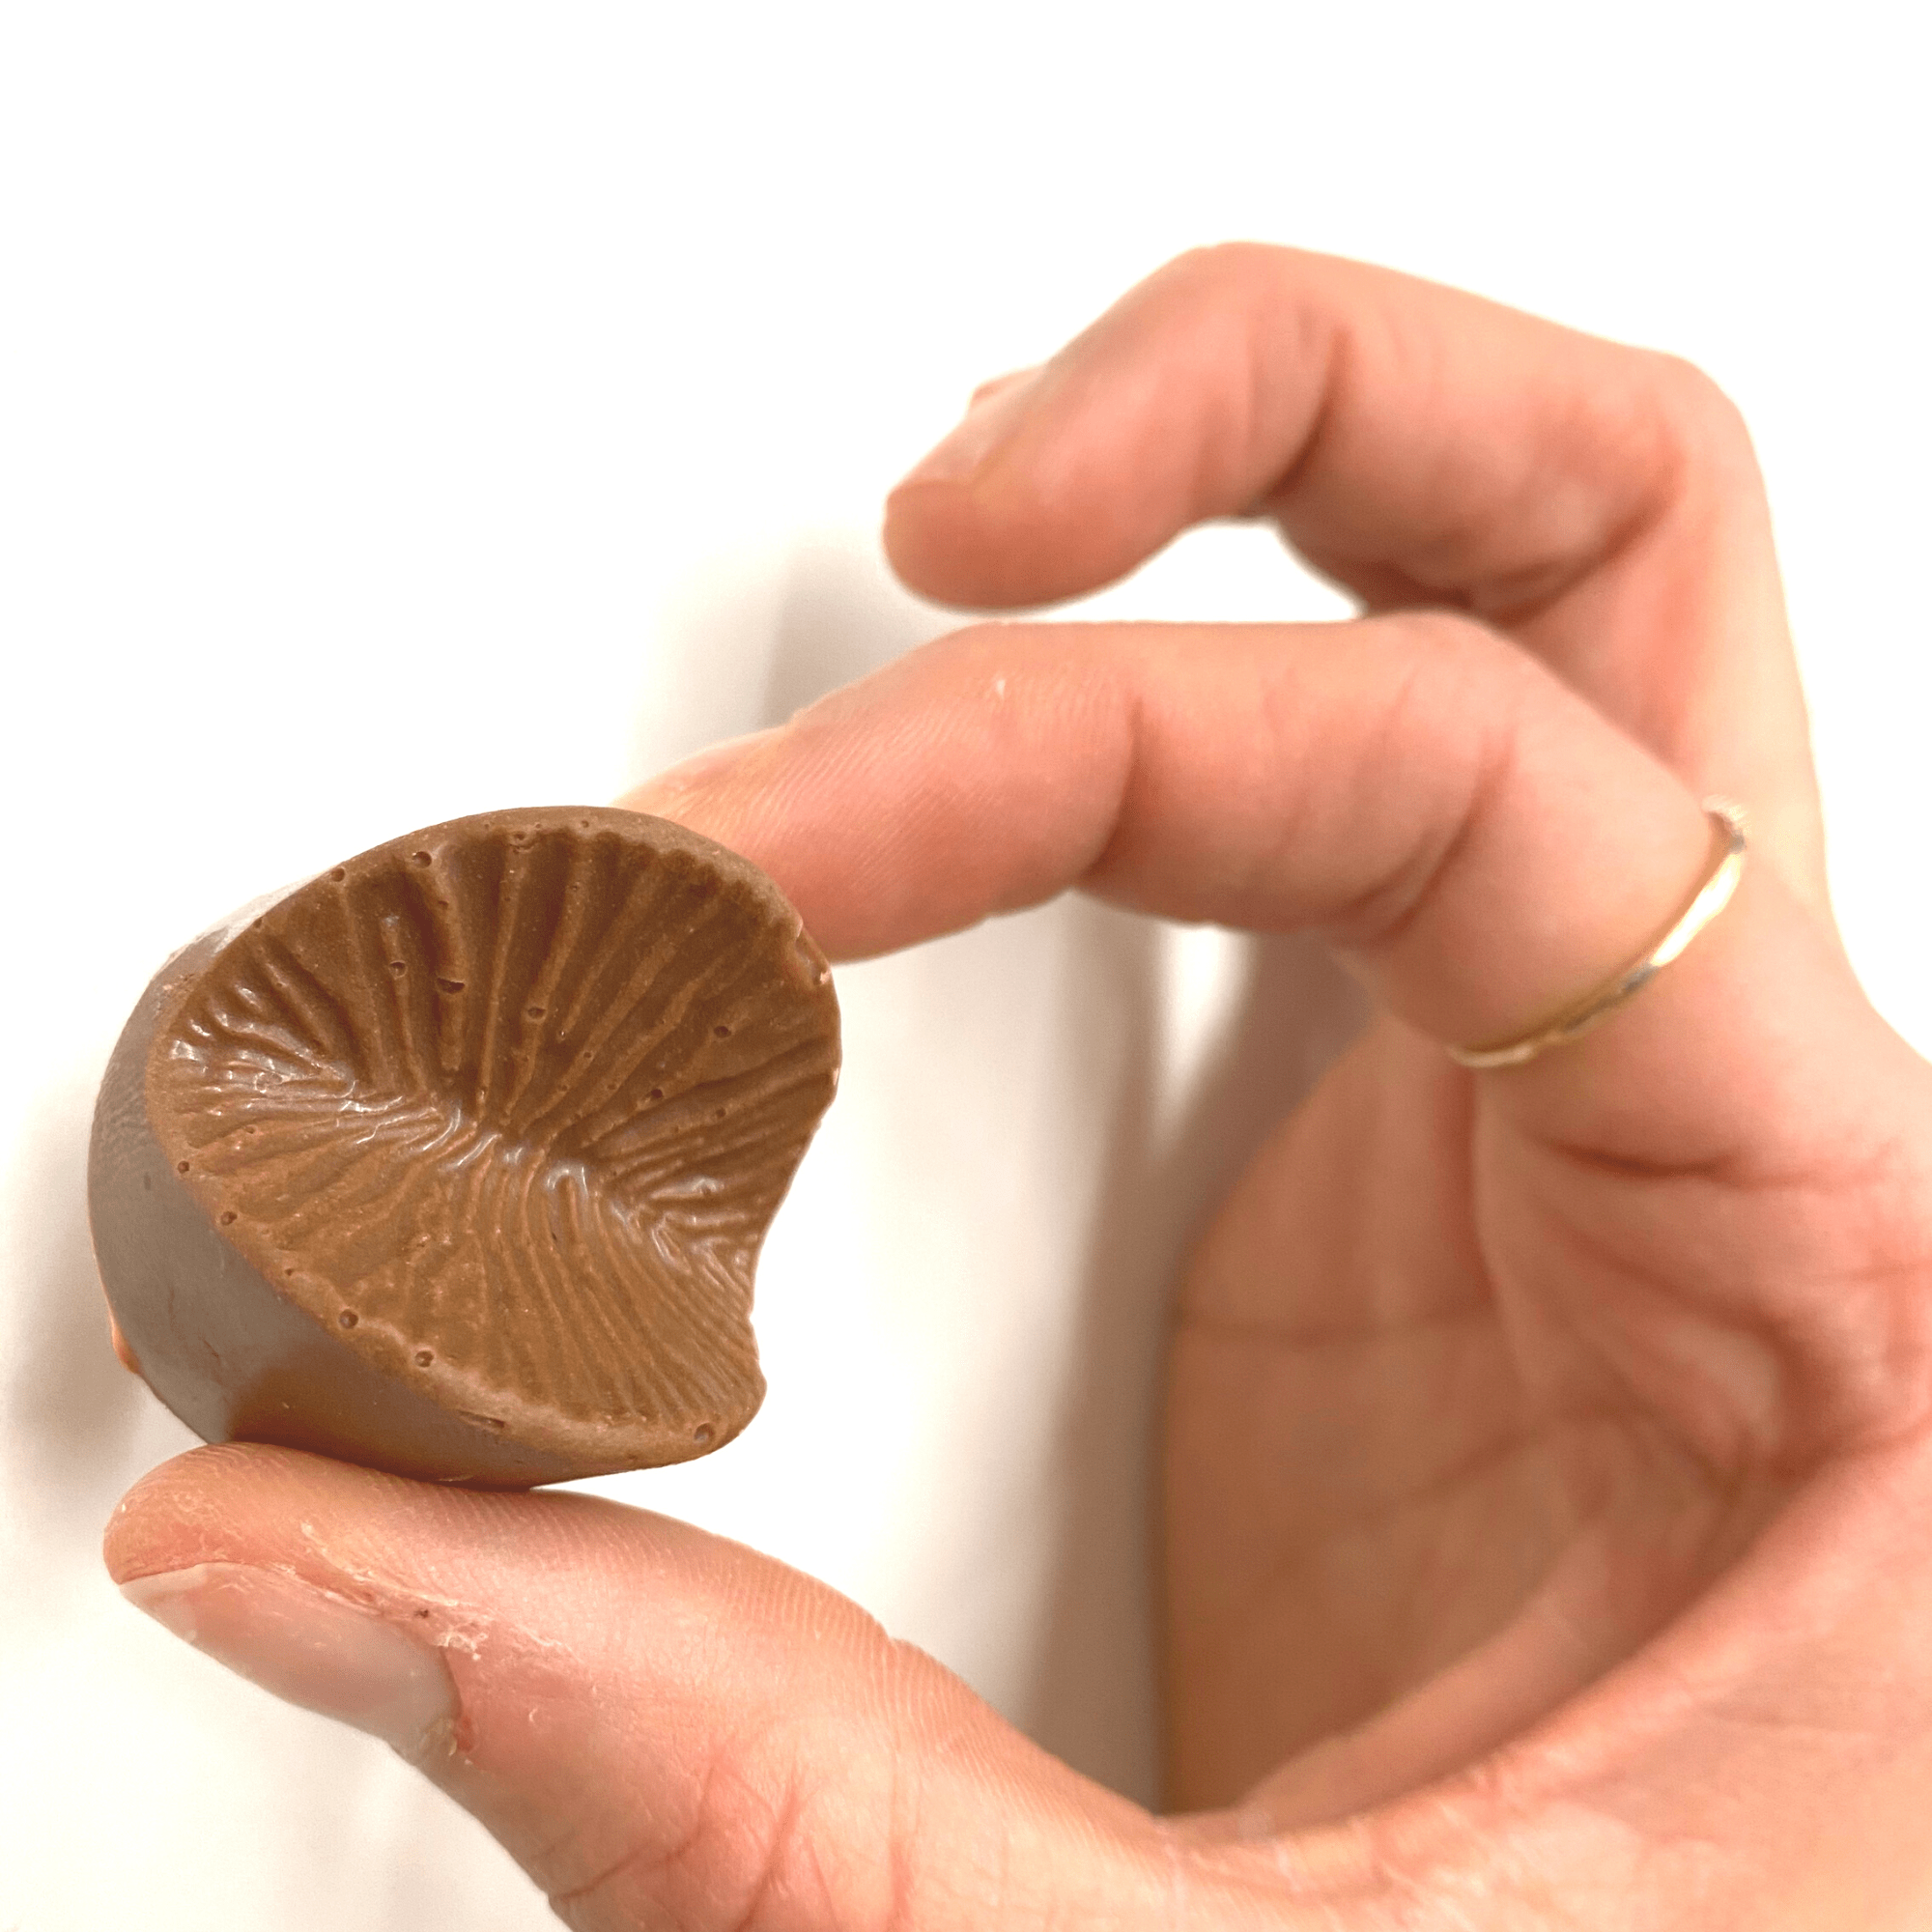 Want to see the sizes? Checkout our Chocolate buttholes here